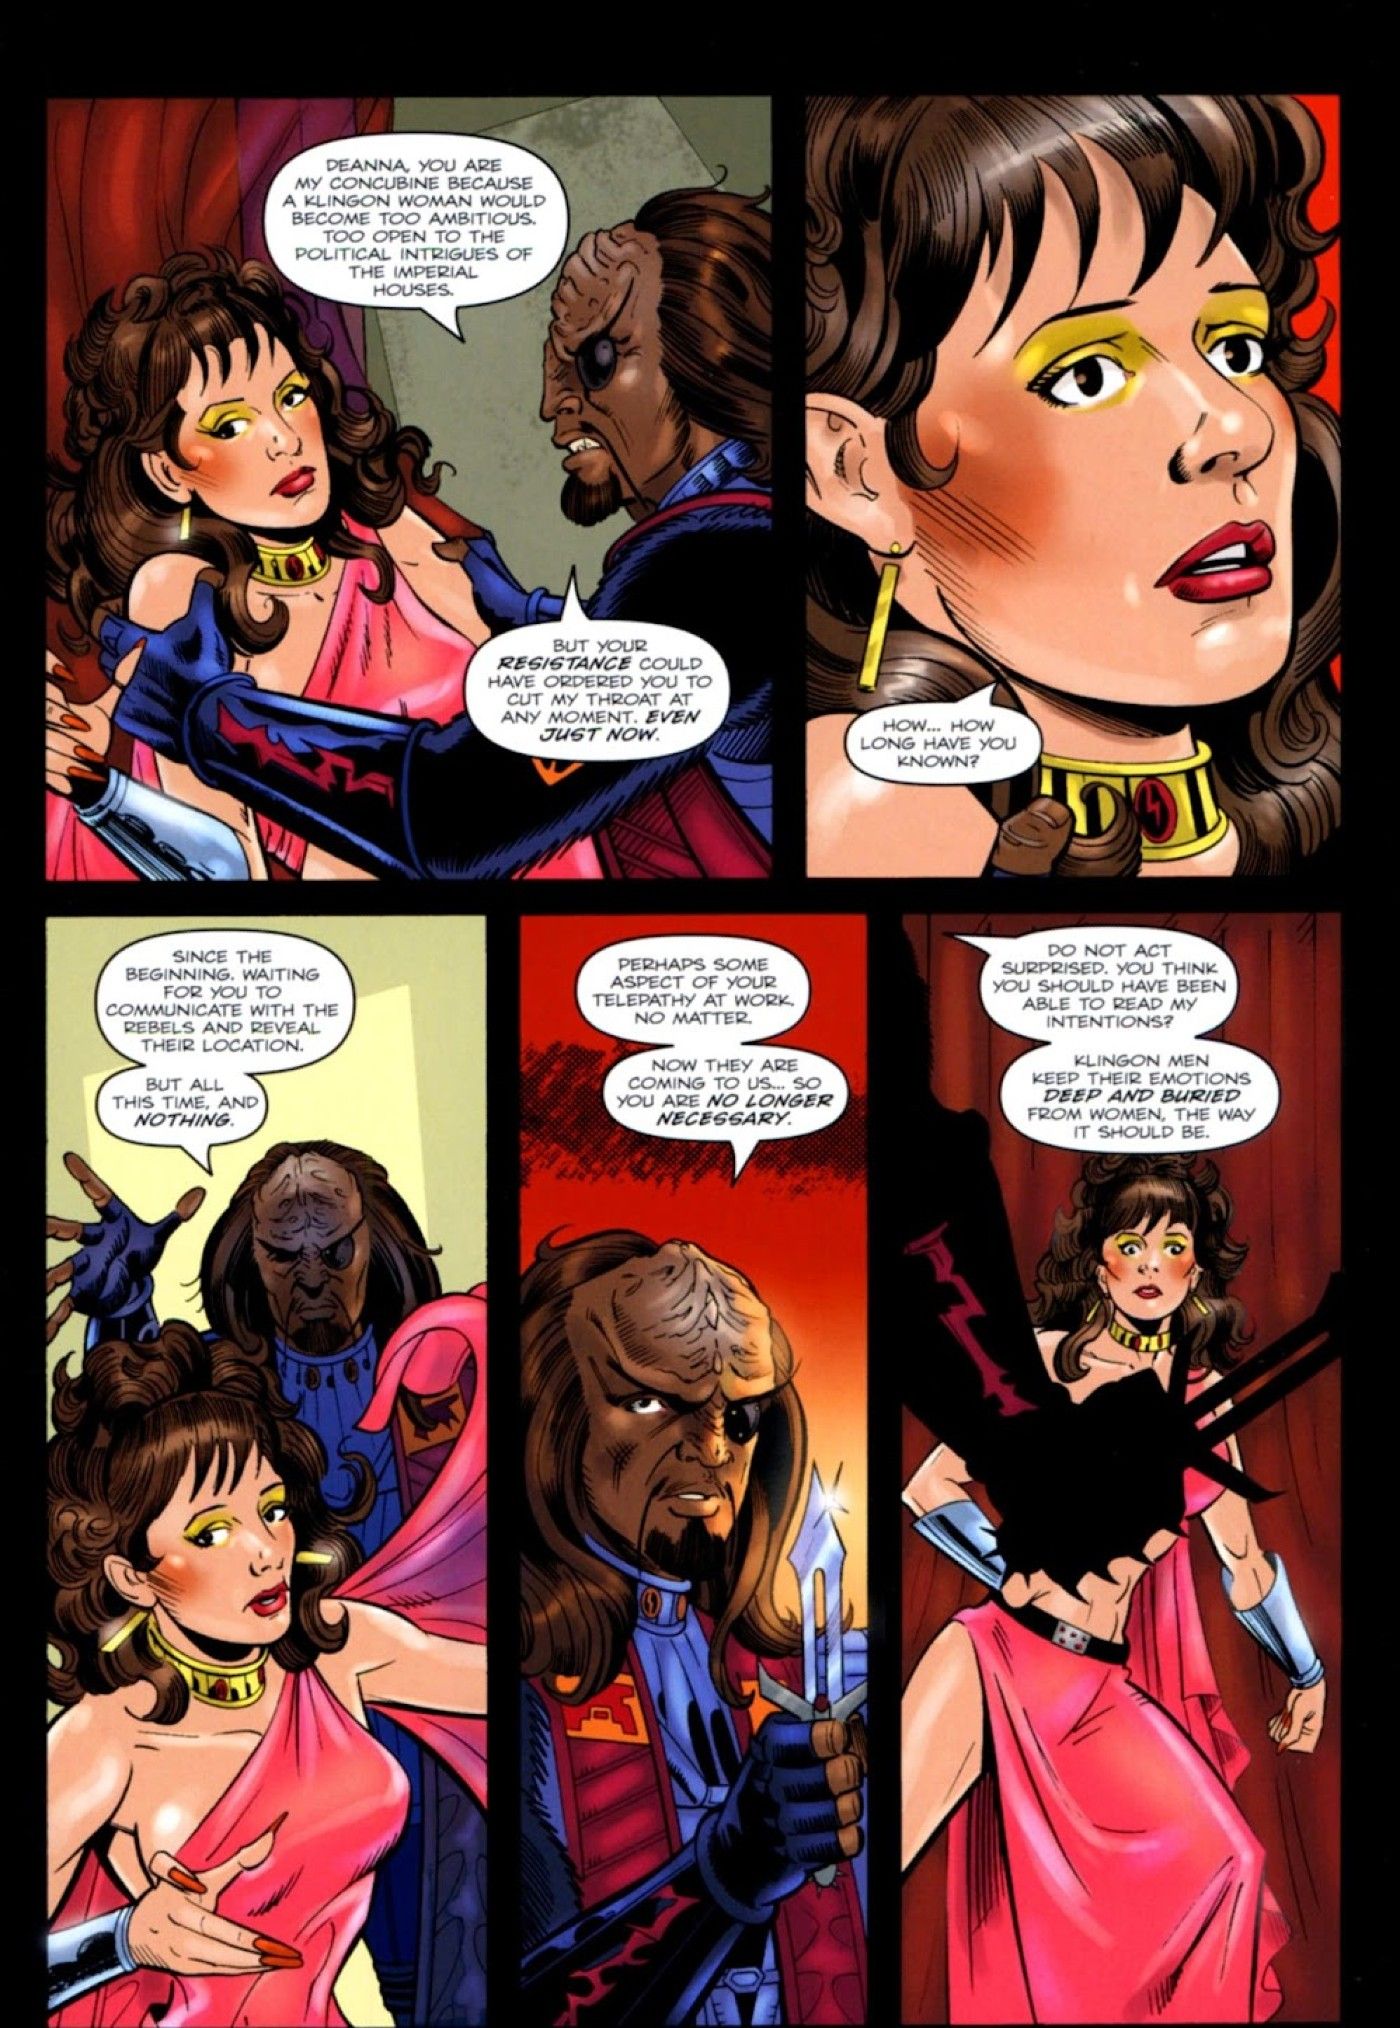 Five panels featuring an alternate timeline Worf explaining why he is about to kill Deanna Troi.